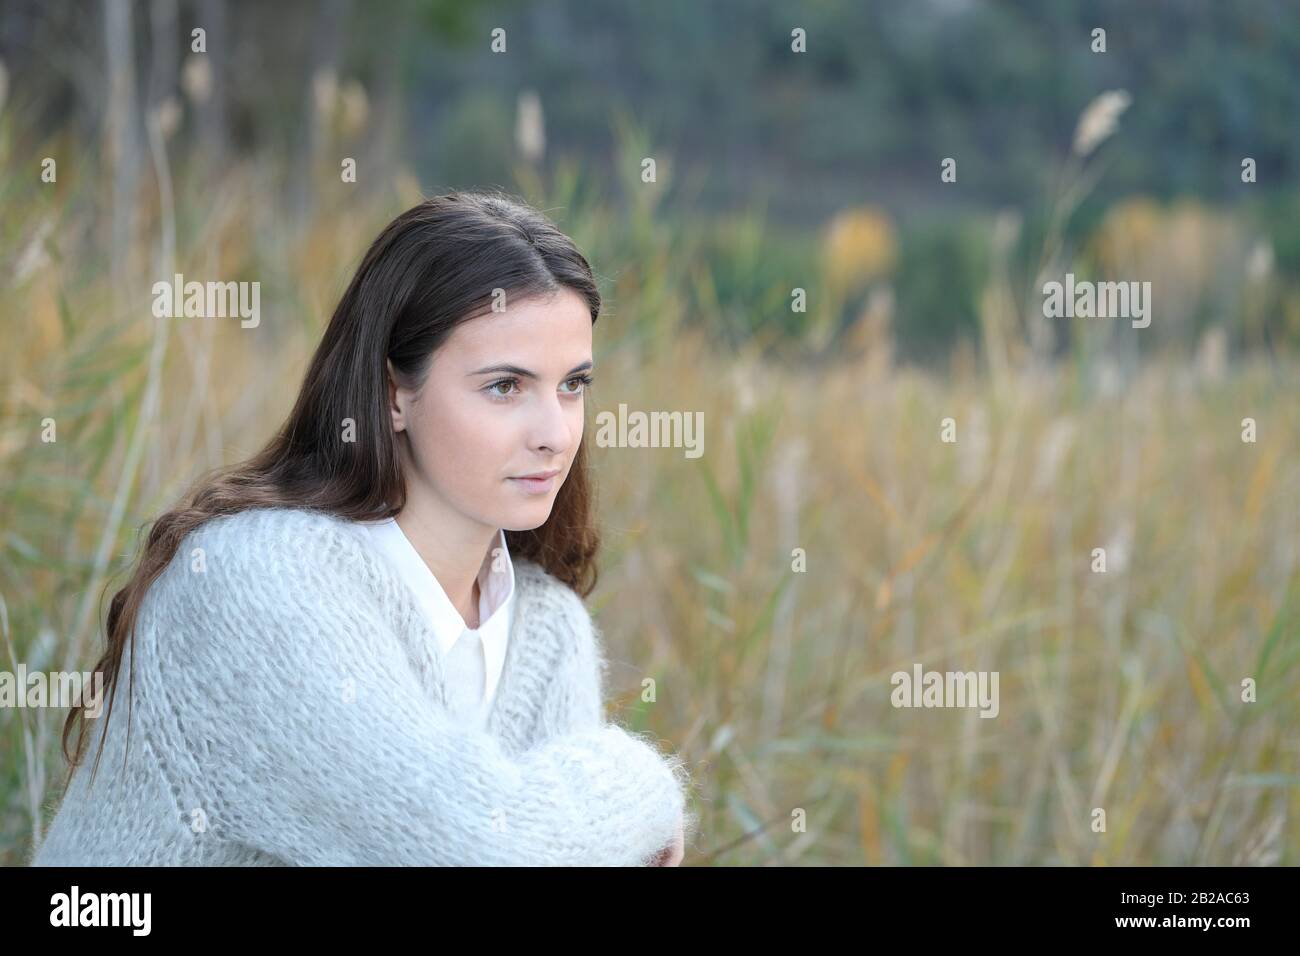 Portrait of a pensive serious teenage girl thinking looking away on a field Stock Photo